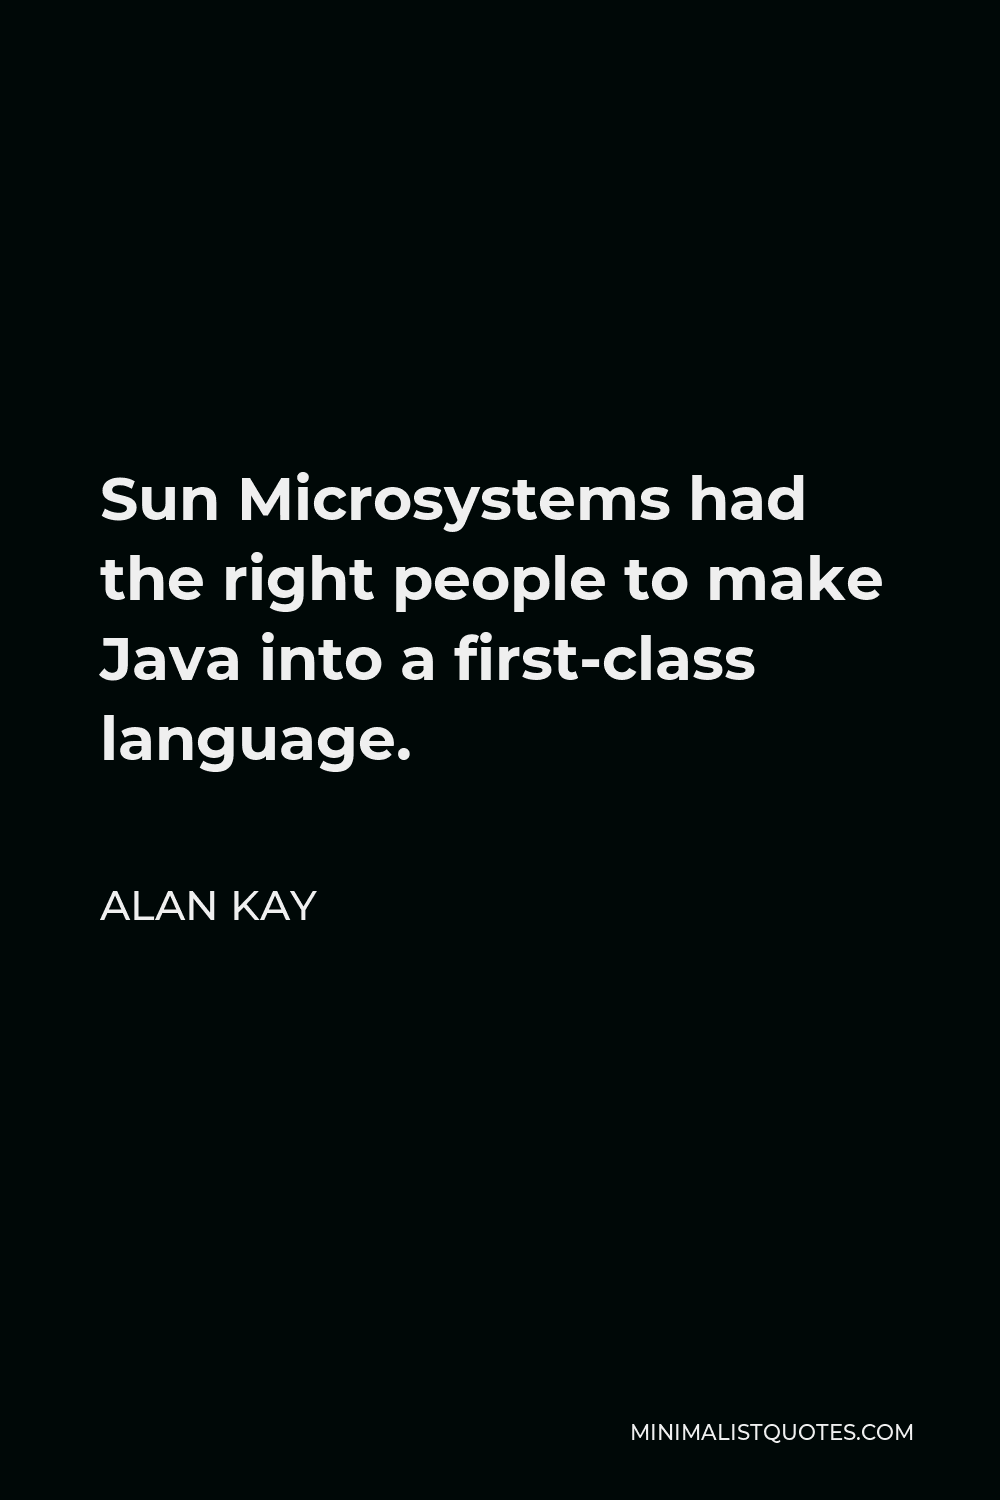 Alan Kay Quote - Sun Microsystems had the right people to make Java into a first-class language.